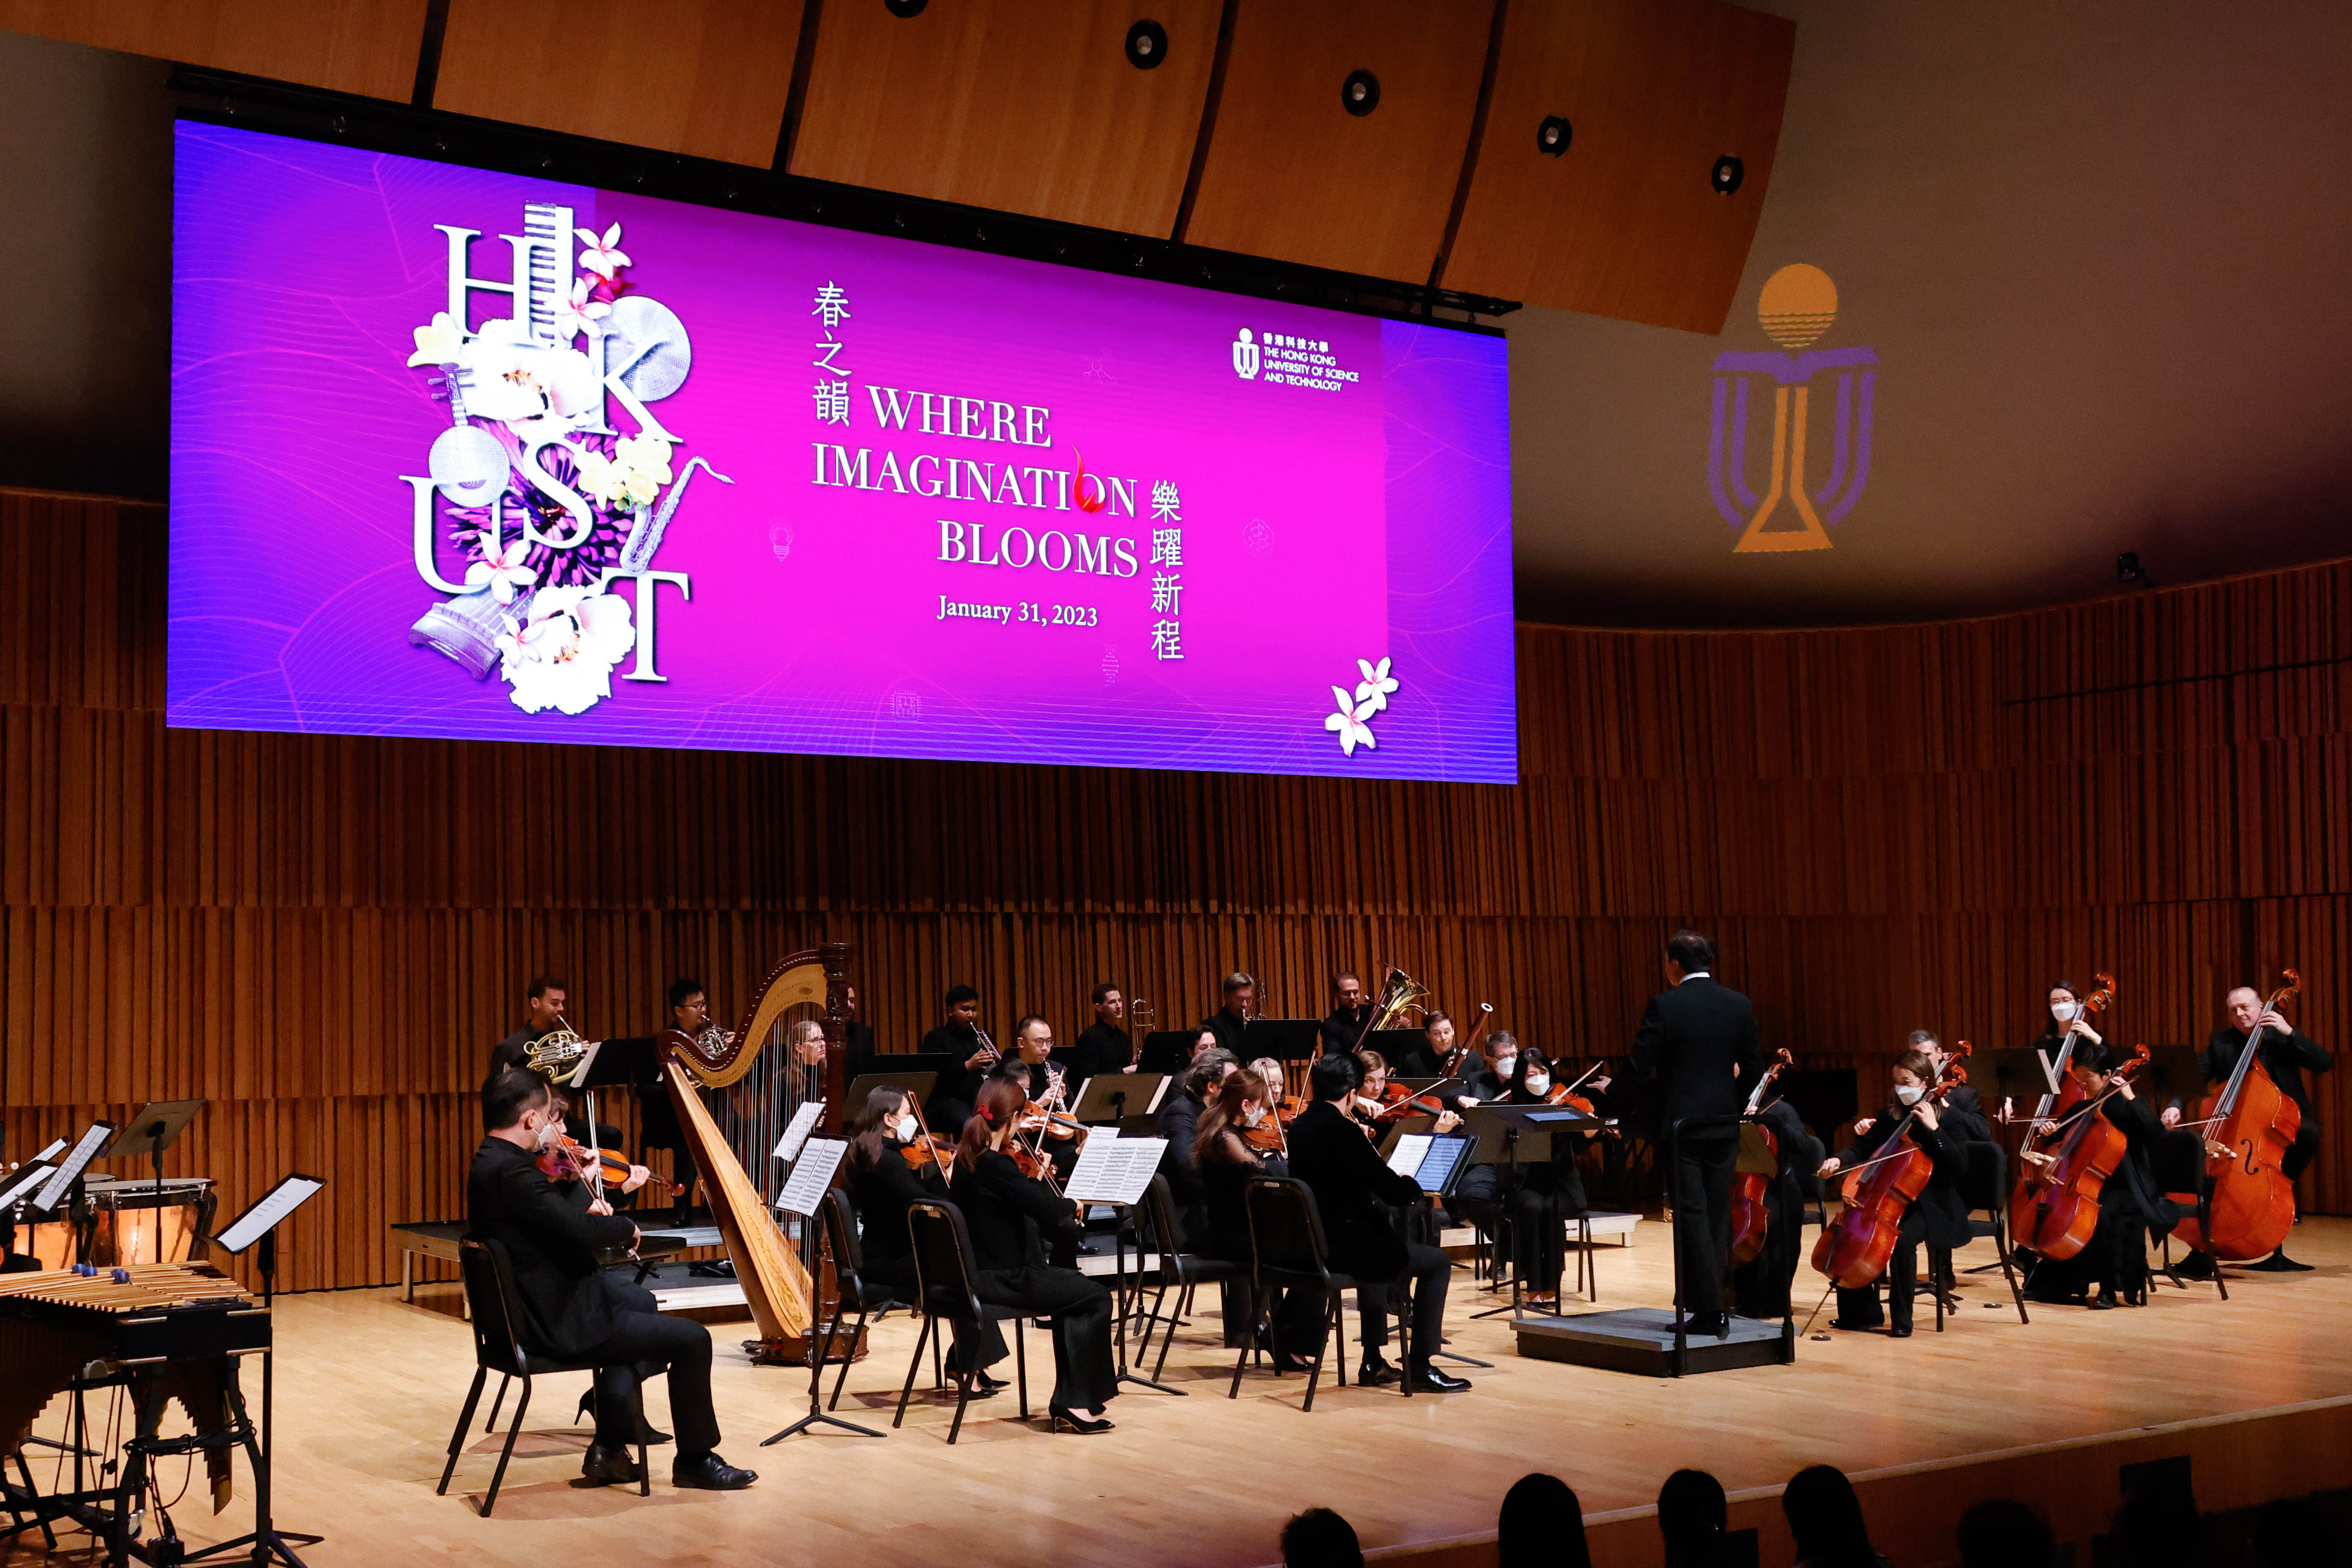 The concert started with a performance by the orchestra led by Mr. Leung Kin Fung, First Associate Concertmaster of Hong Kong Philharmonic Orchestra.